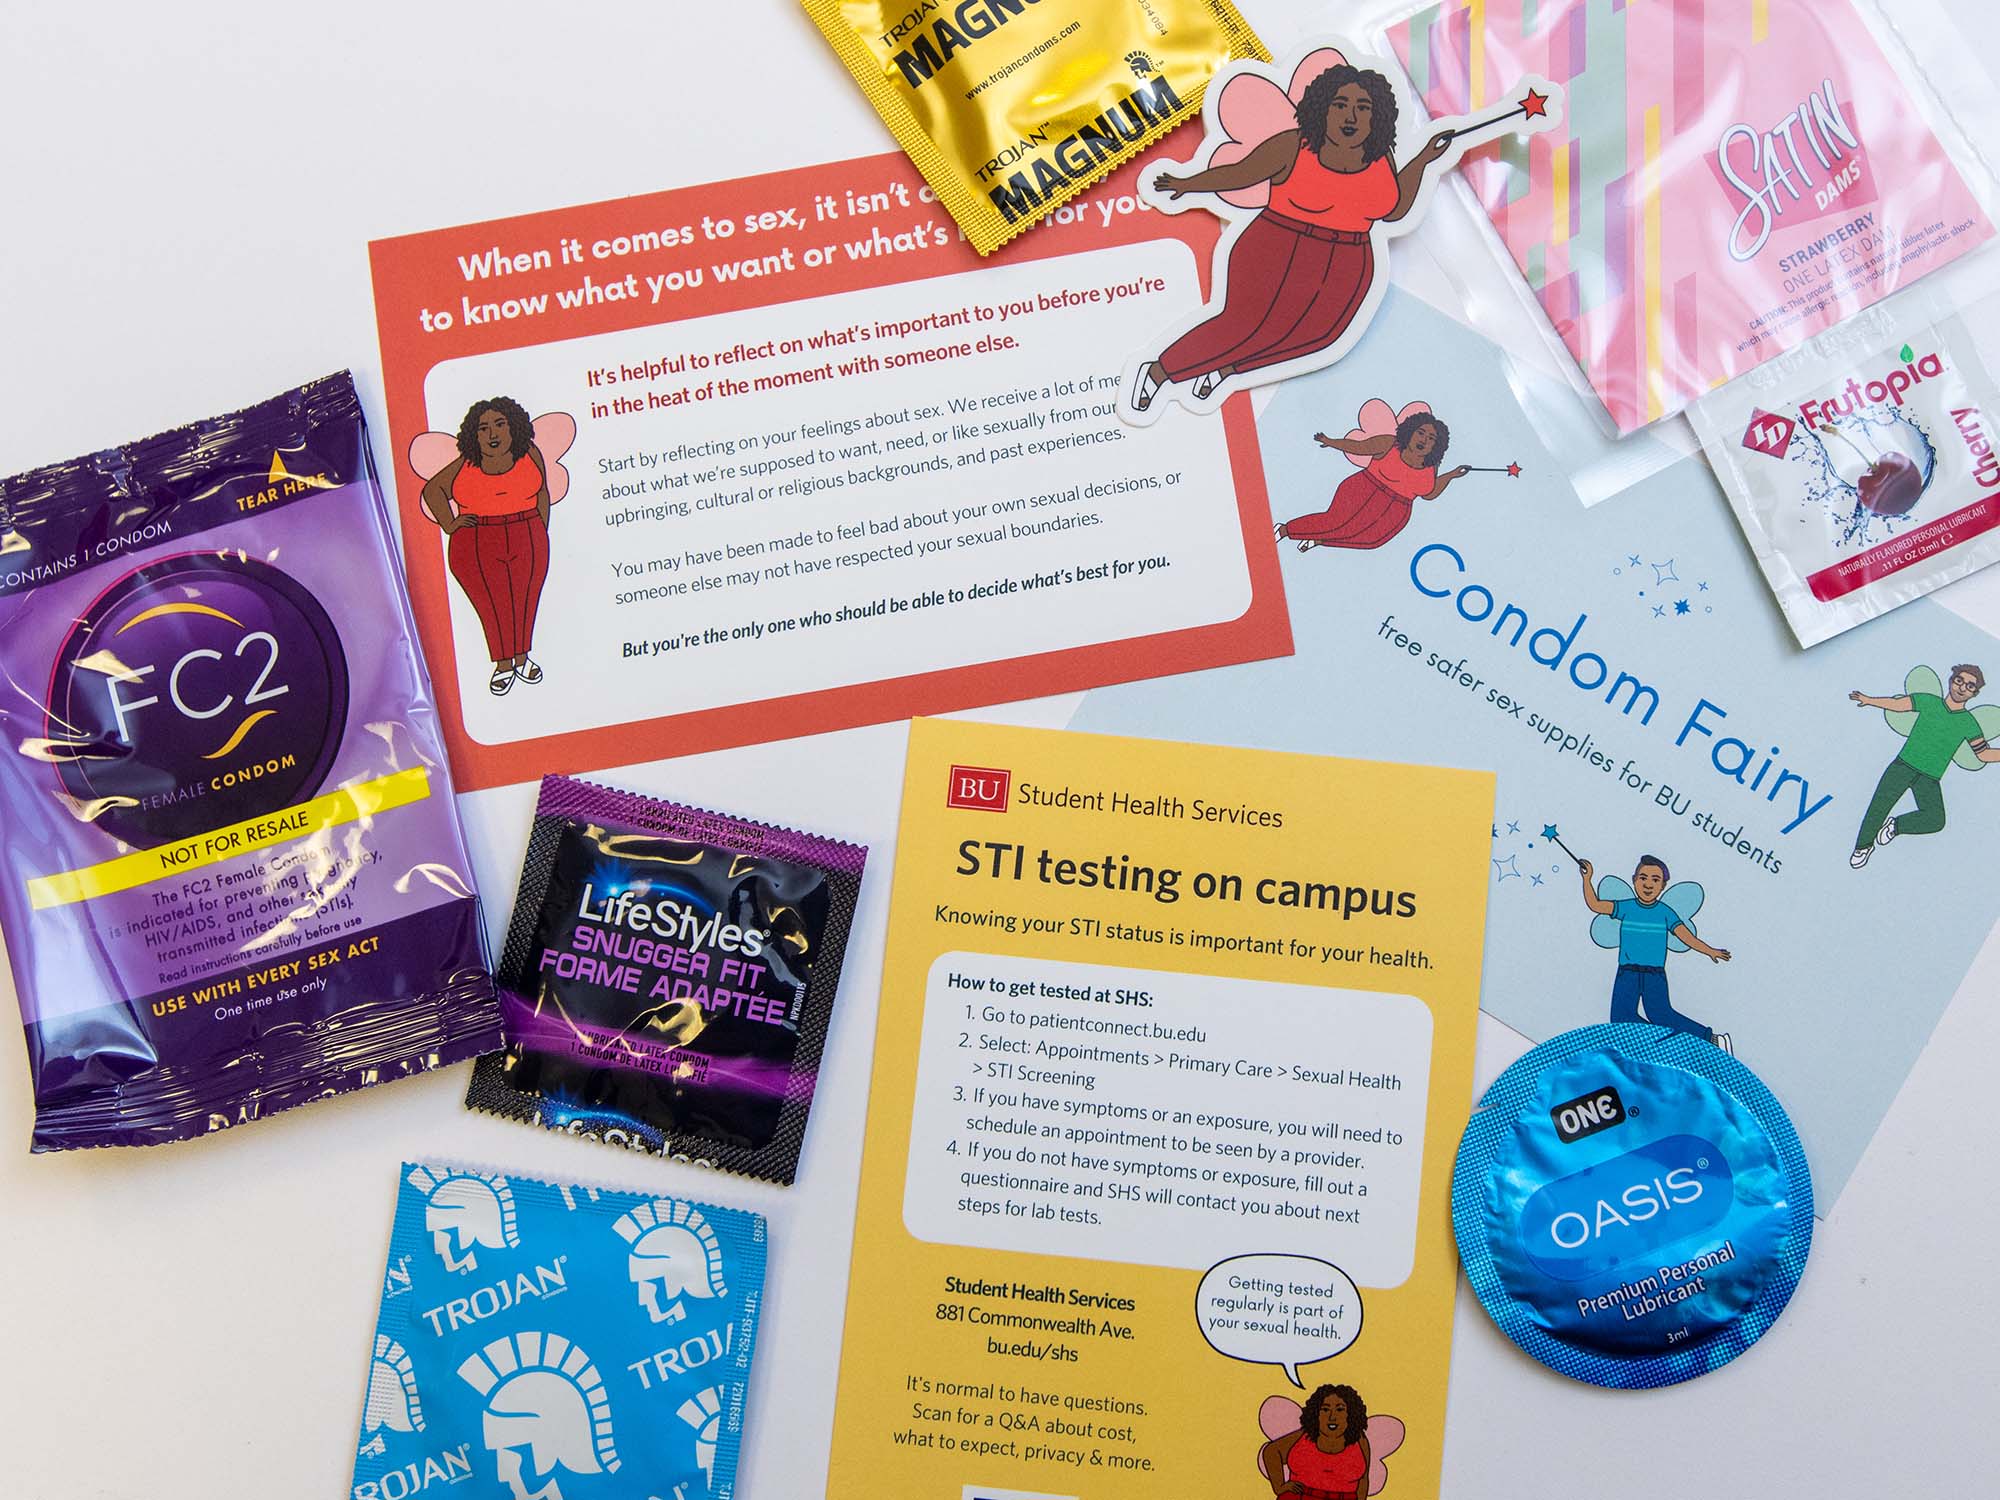 Photo: A flat-lay of the supplies found when one orders from the Condom Fairy program located at BU. Various information cards and condoms are scattered on a white table. A featured image of the condom fairy characters in sticker form lay on top of the various cards.